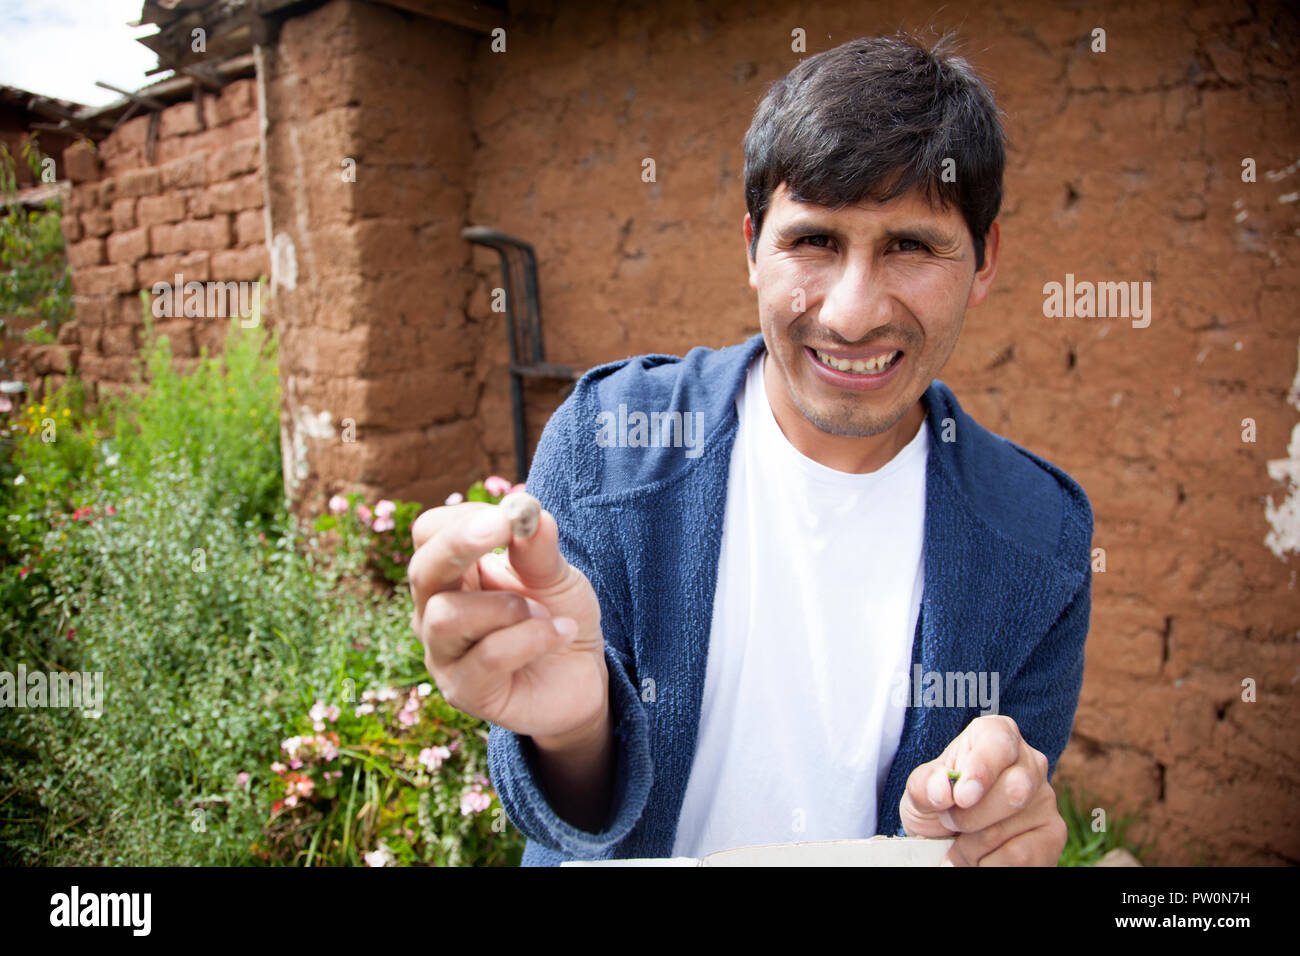 Potato  Manuel Choqque of Huatata near Chinchero, Peru. He has been breeding potatoes with high intensity of color, which signify higher nutrients. Stock Photo